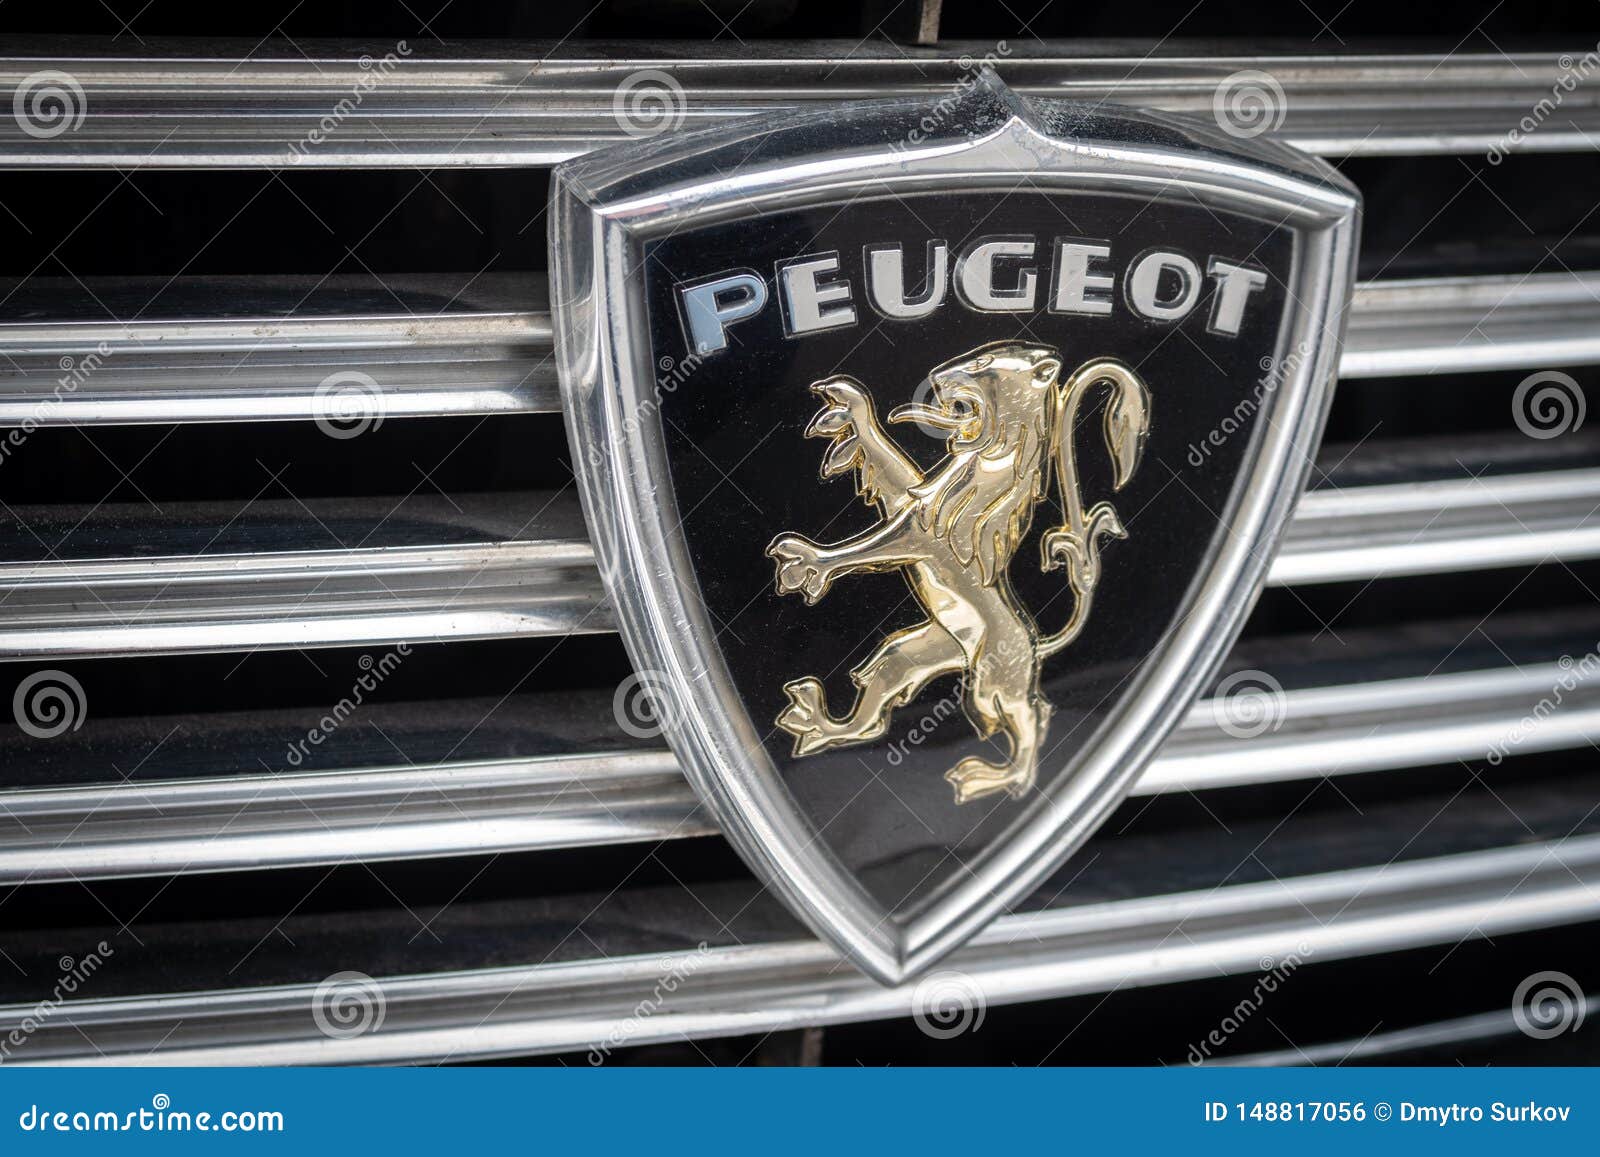 Peugeot Logo on Classic Car Editorial Photo - Image of style, transport:  148817056